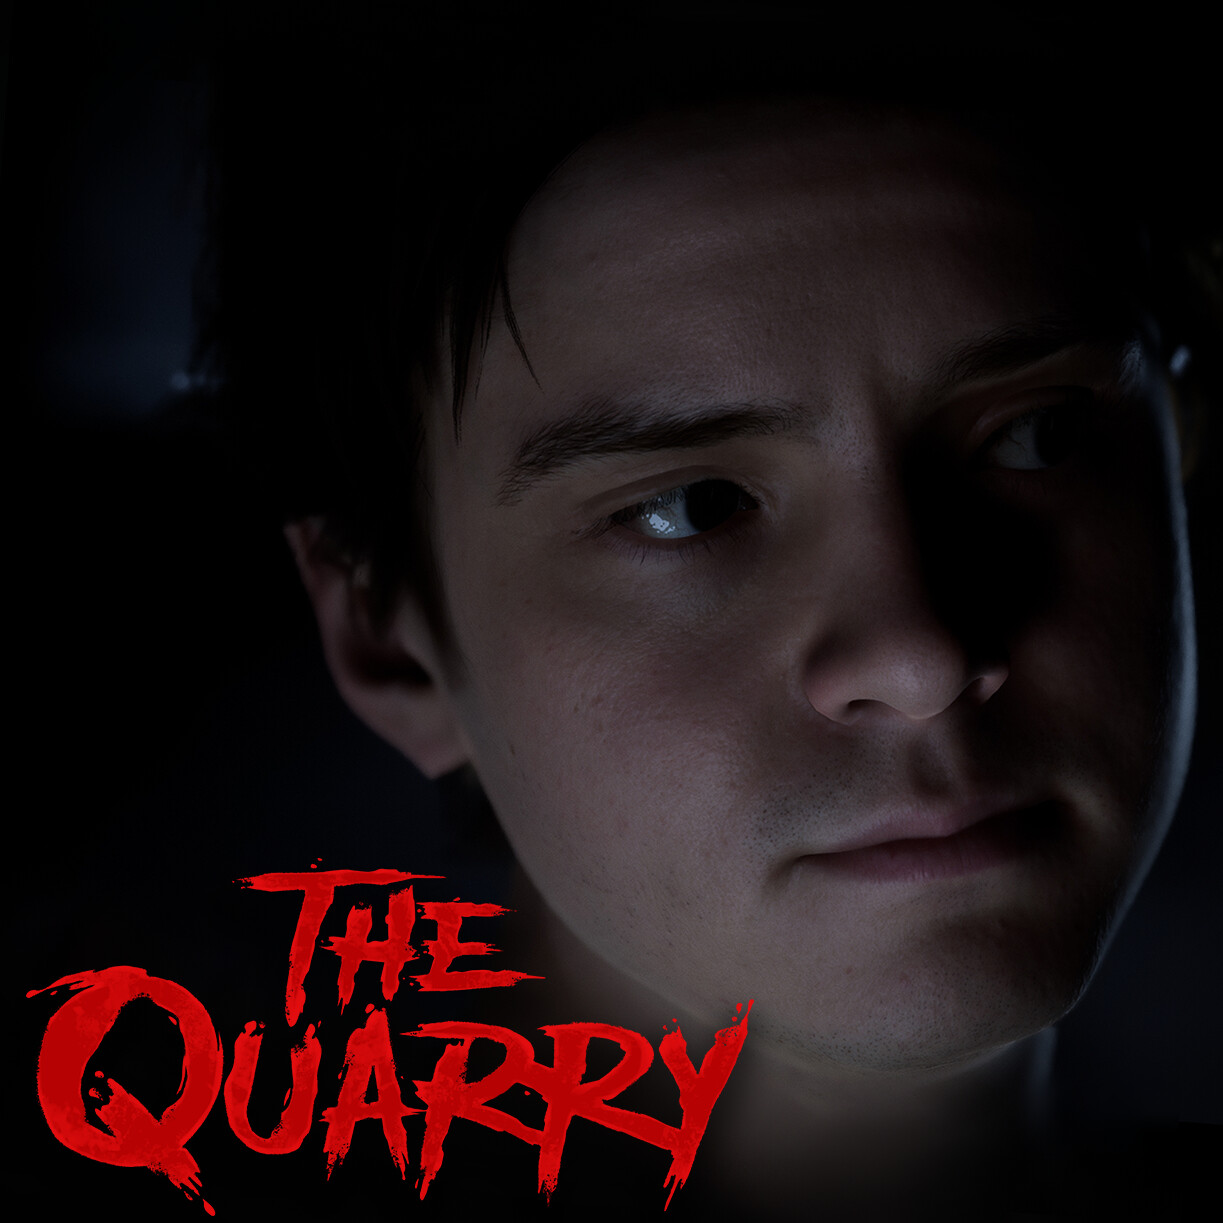 The quarry дилан. The Quarry Майлз. The Quarry Дилан на аву. Дилан и Кейтлин the Quarry. Rule 64 Dylan and Ryan the Quarry.